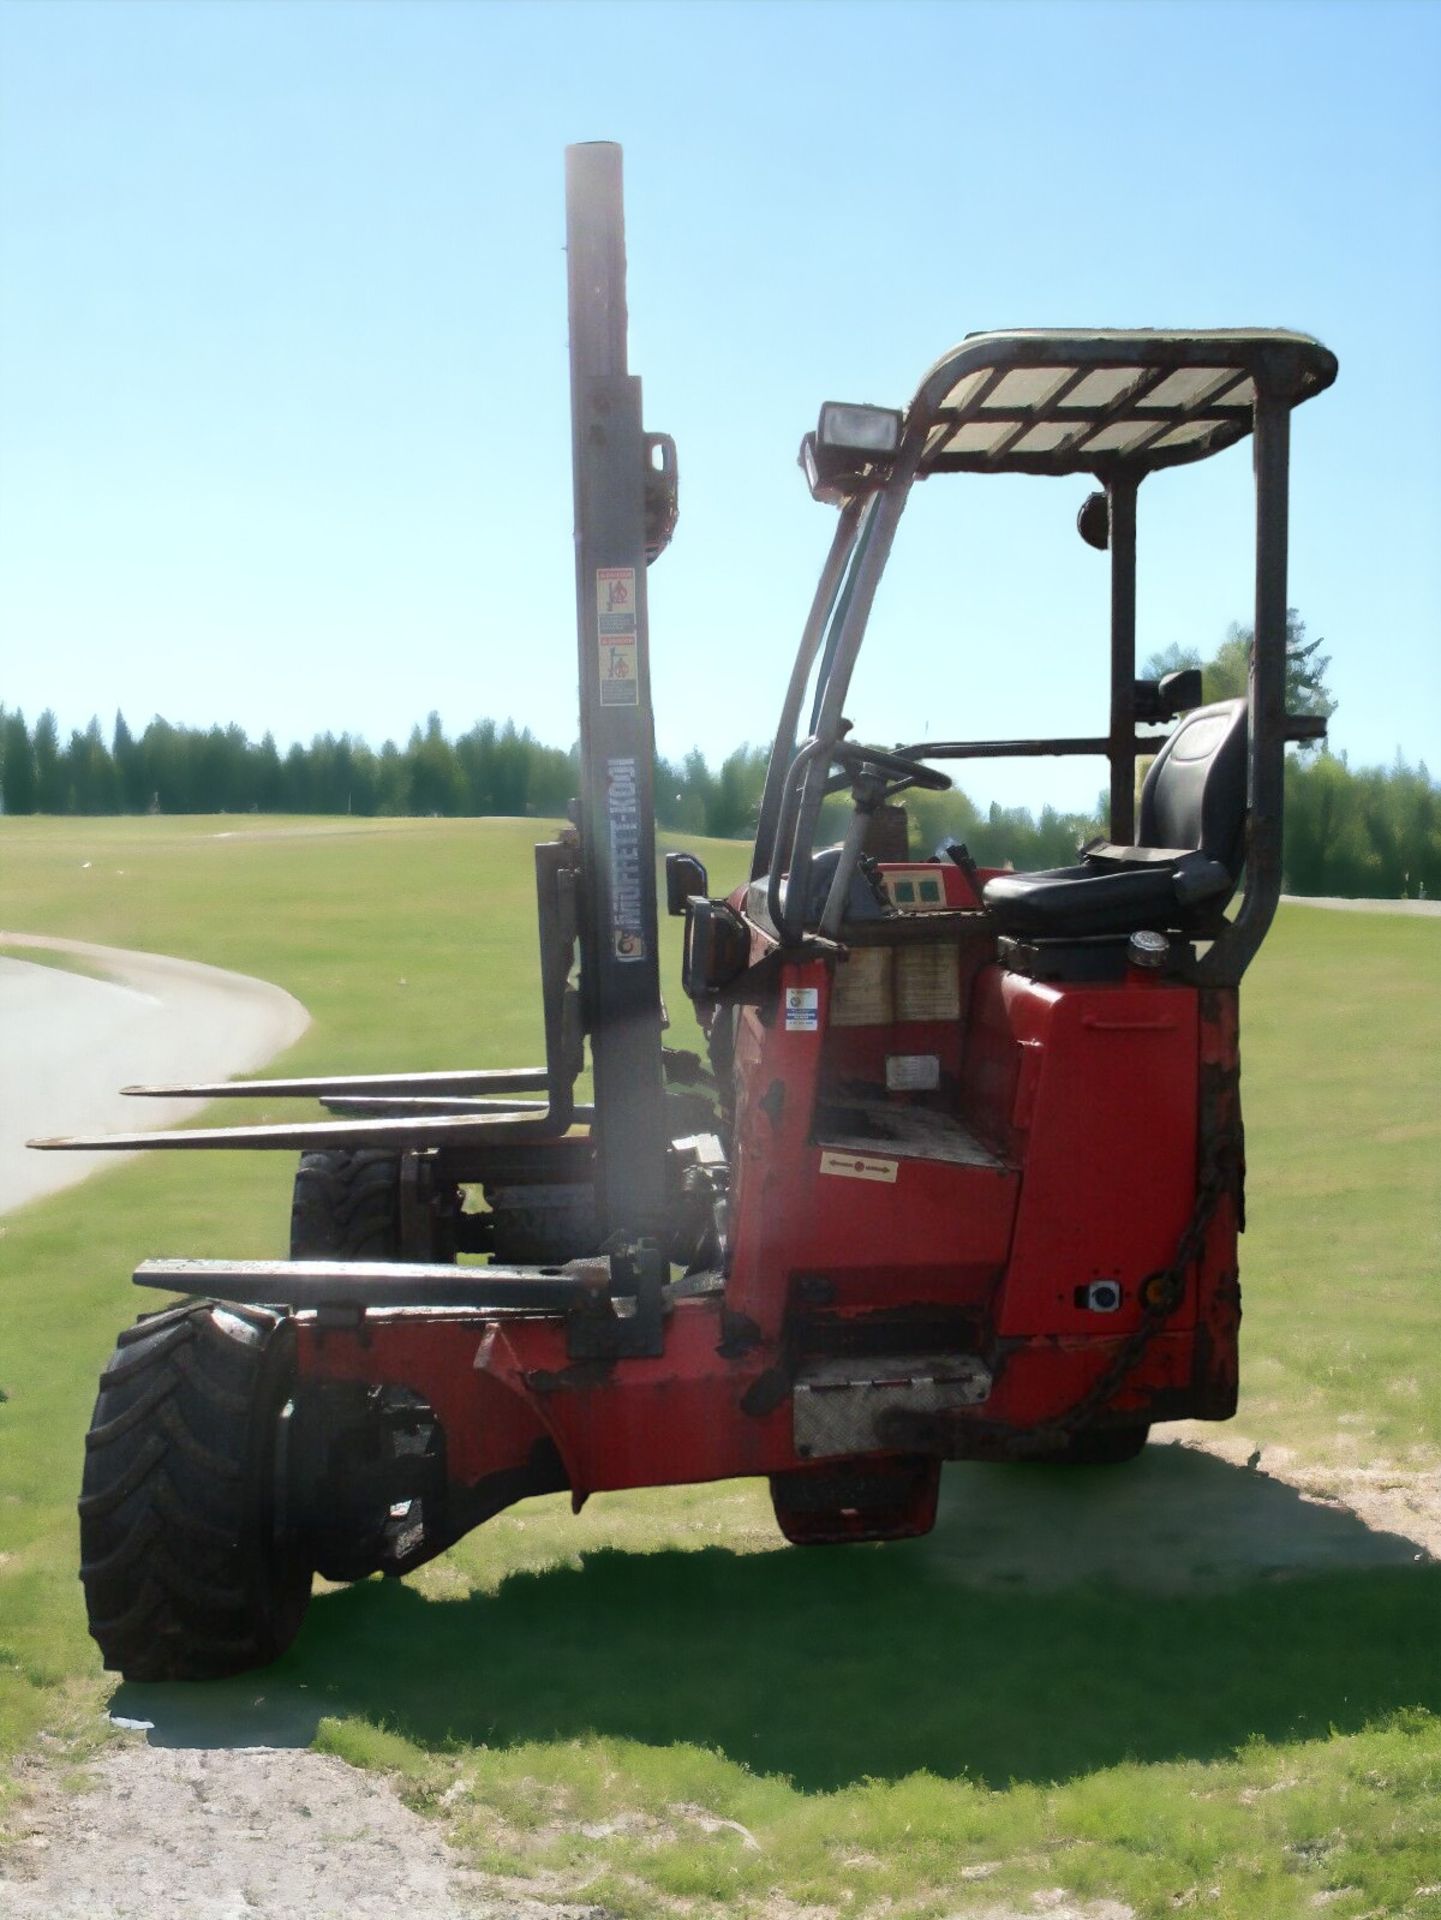 TERRAIN WITH THE MIGHTY MOFFETT MOUNTY M8 25.4 FORKLIFT - Image 12 of 14